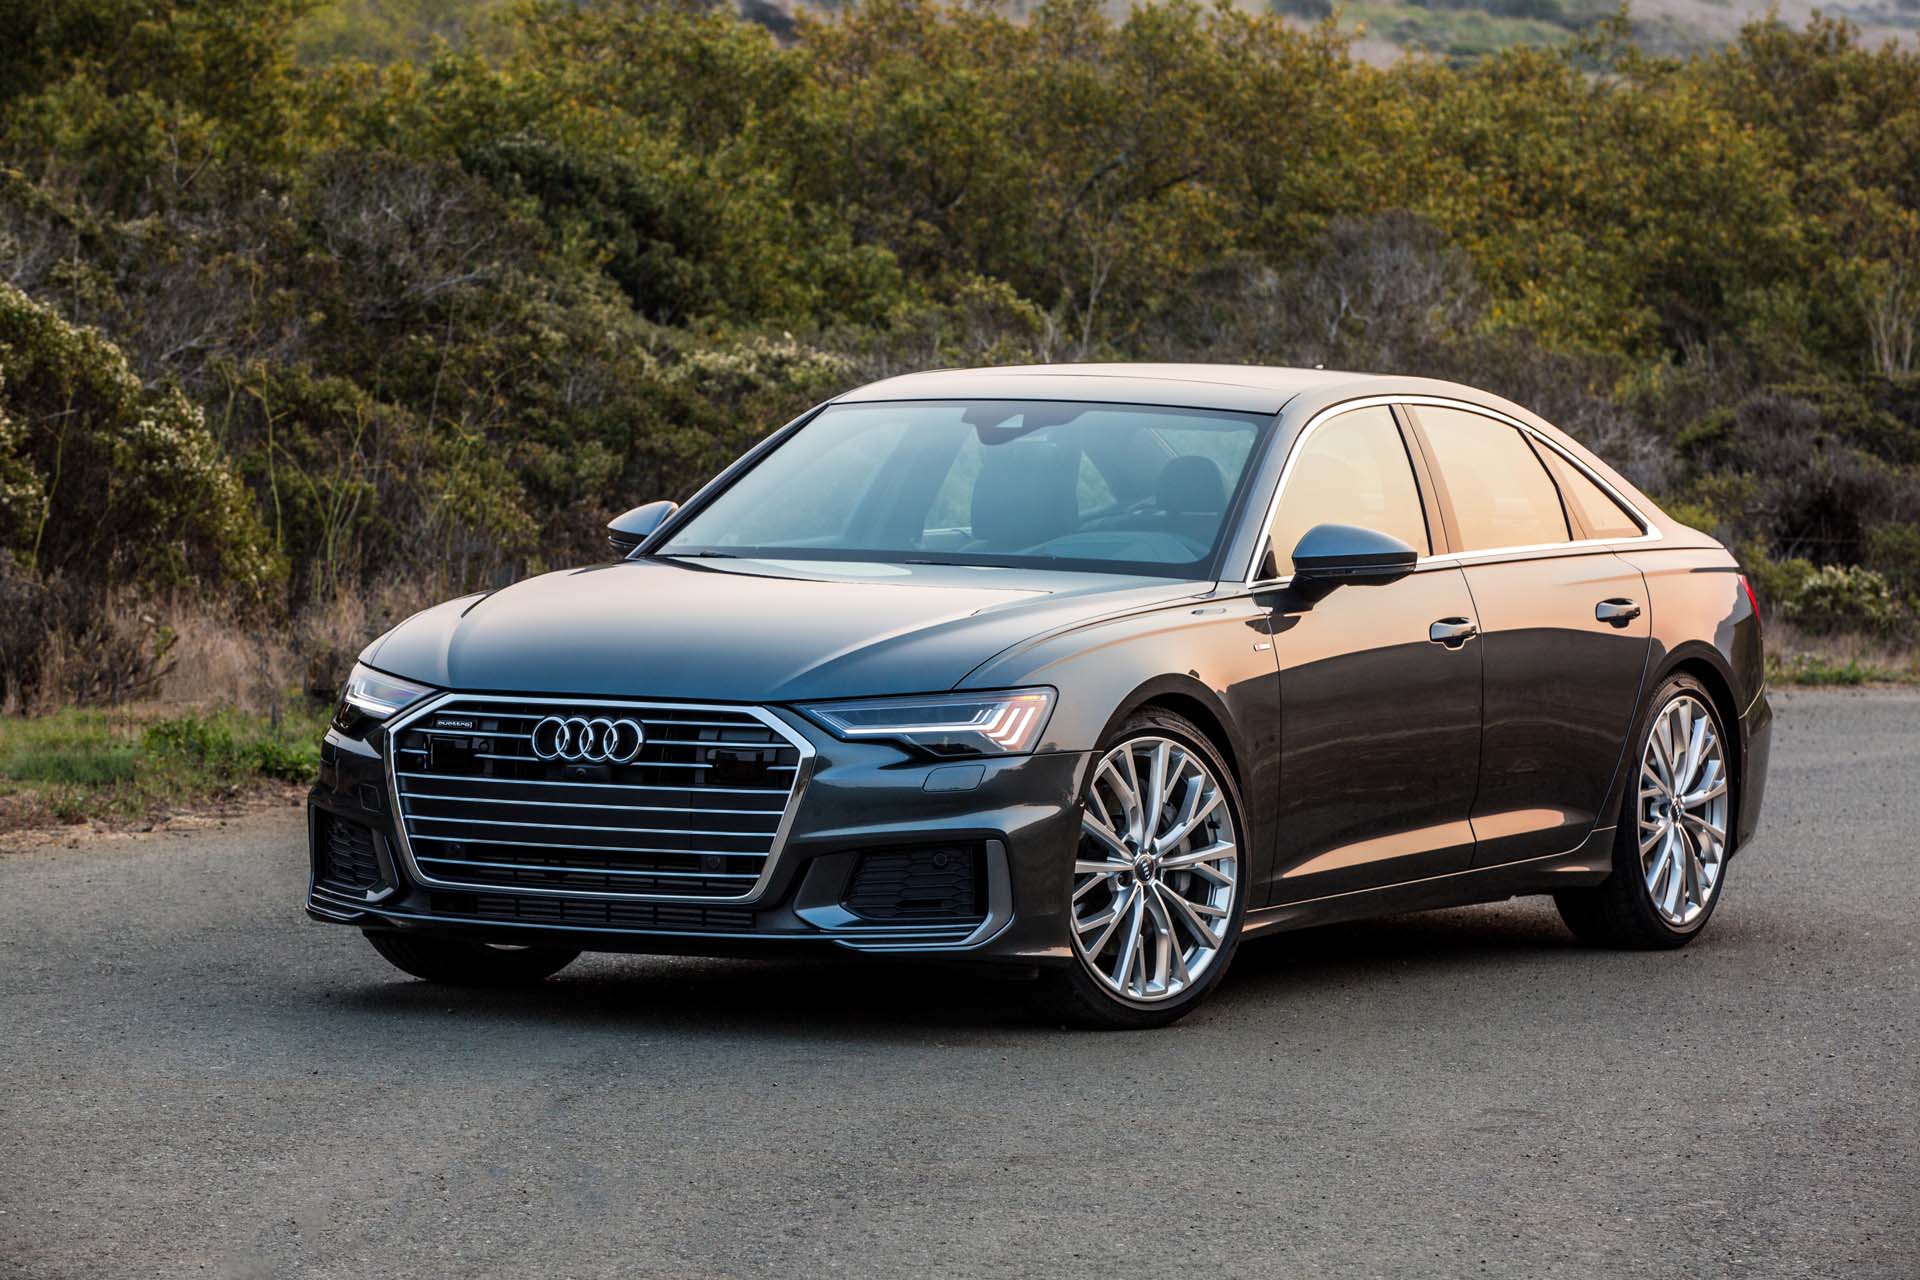 Audi A6 Review, Ratings, Specs, Prices, and Photo Car Connection